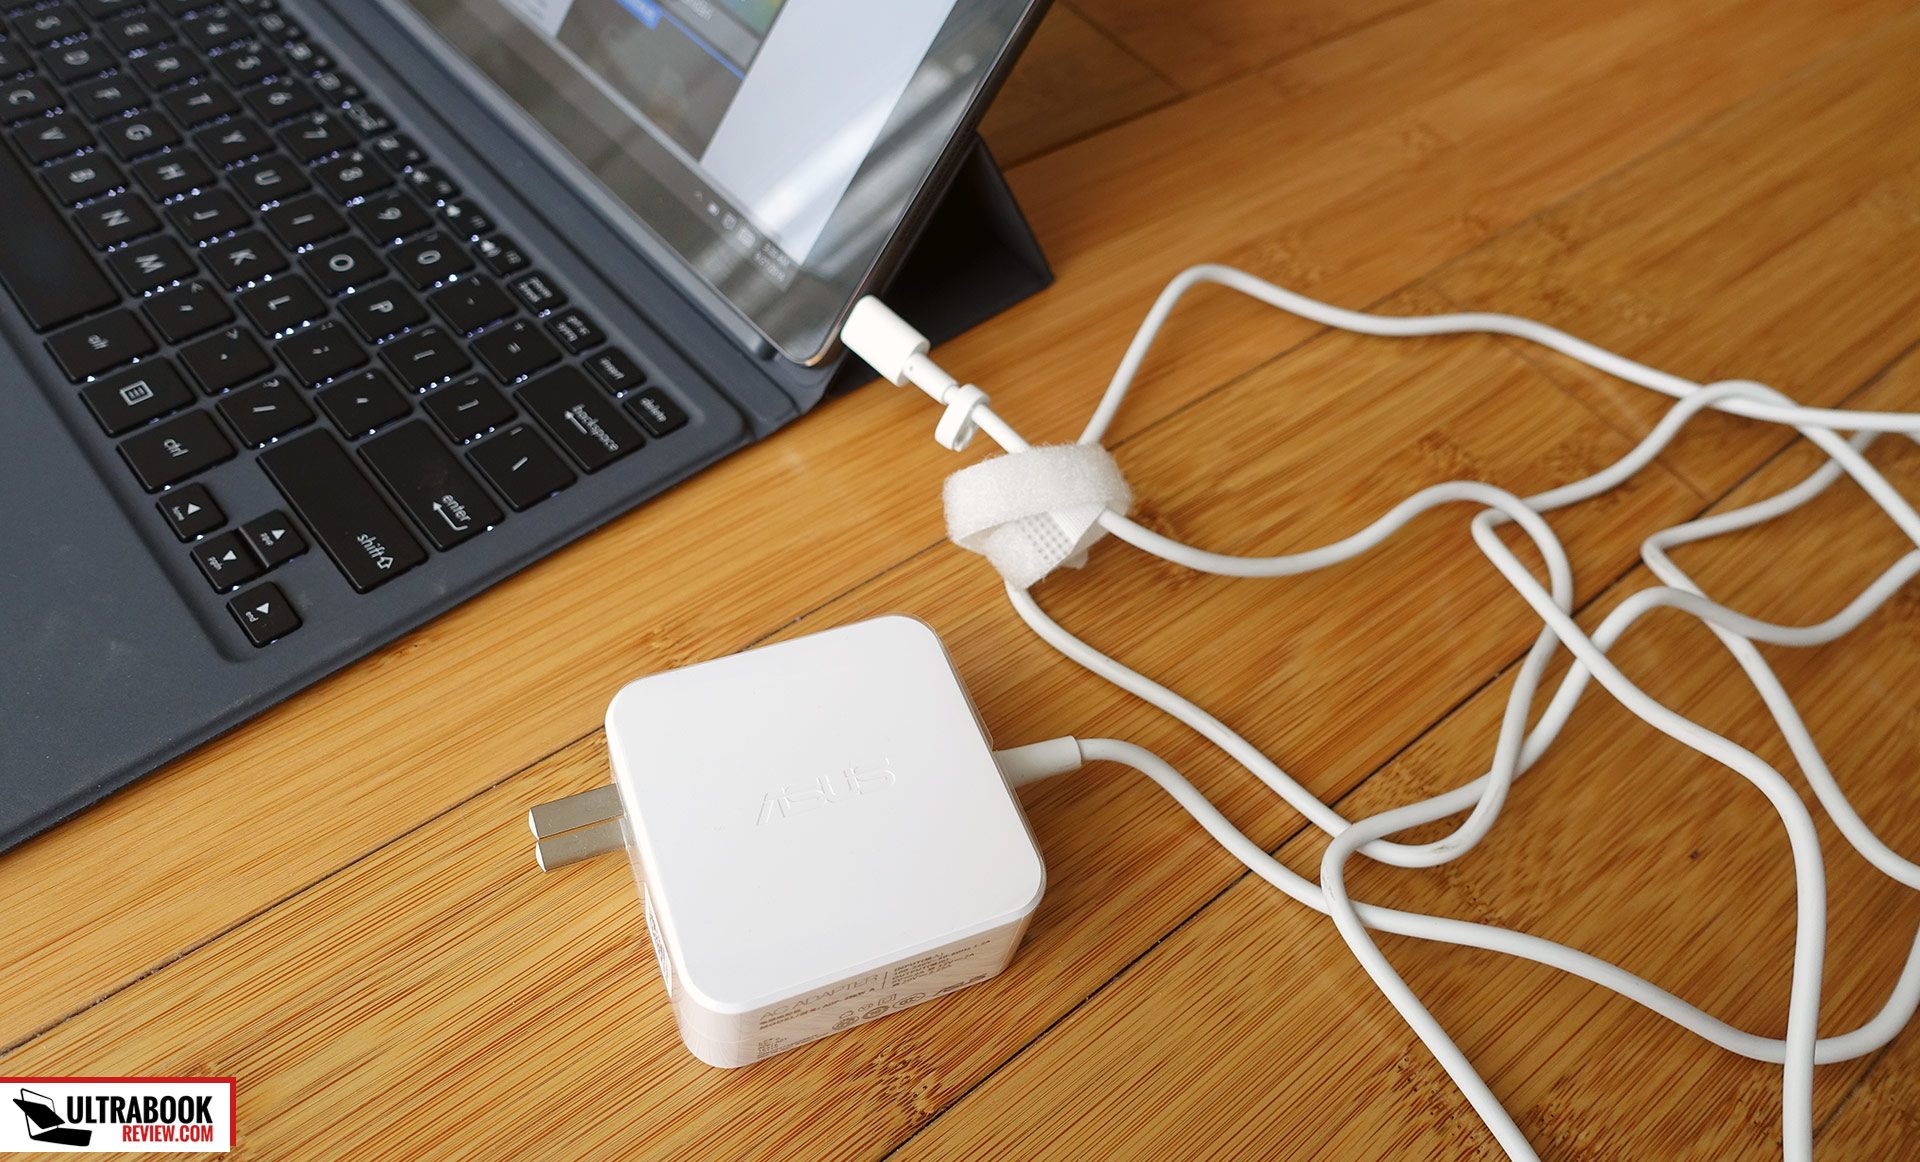 A 45W white power-brick and charging cables are included